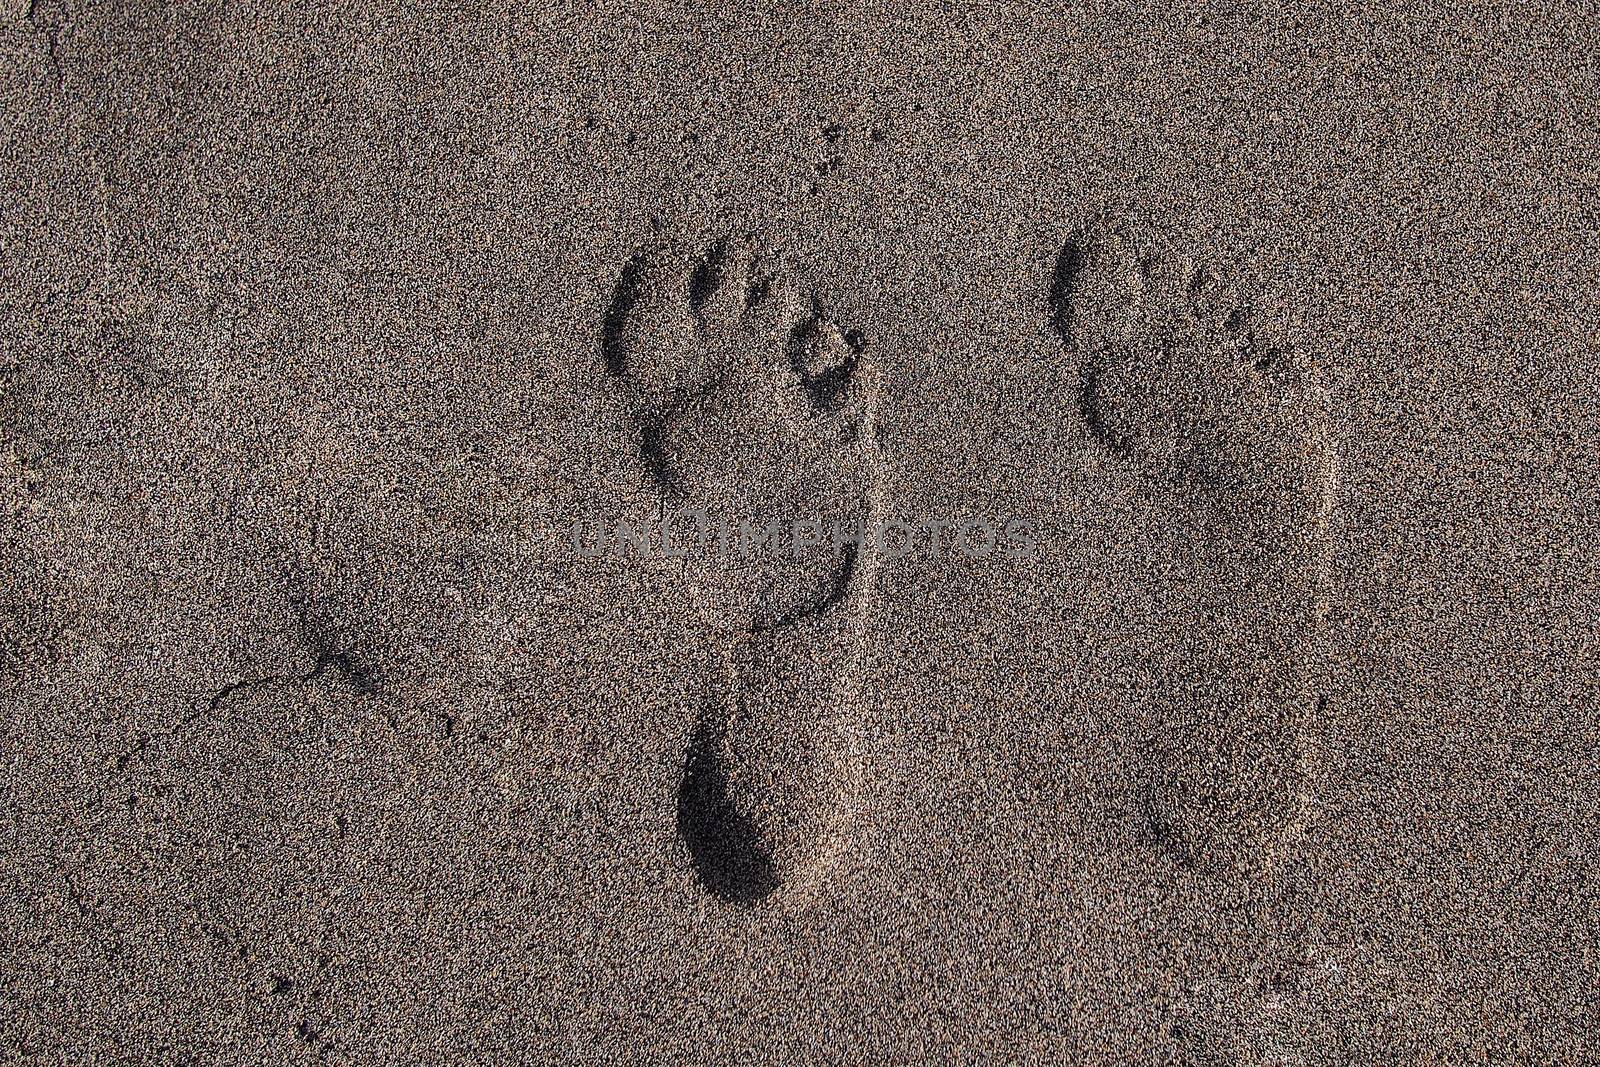 Two footprints in the sand, near the beach